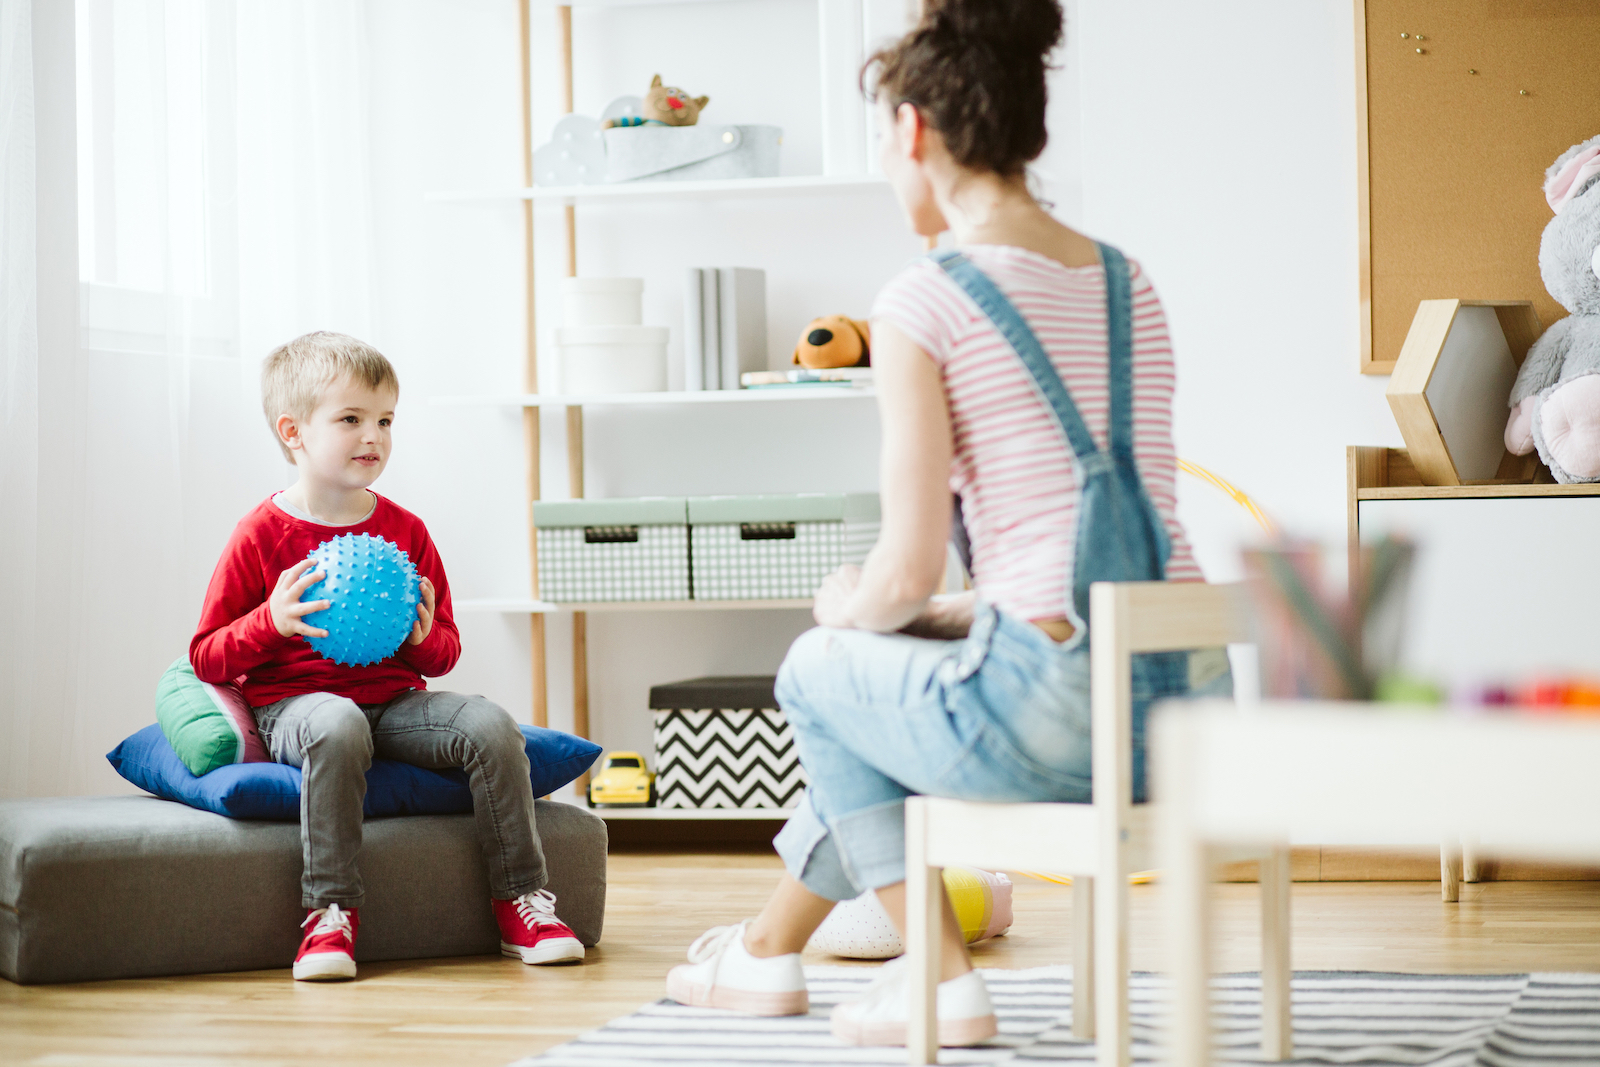 Play Therapy  - What it is, how it works and where to find a play therapist near me  - child development , therapist and child 